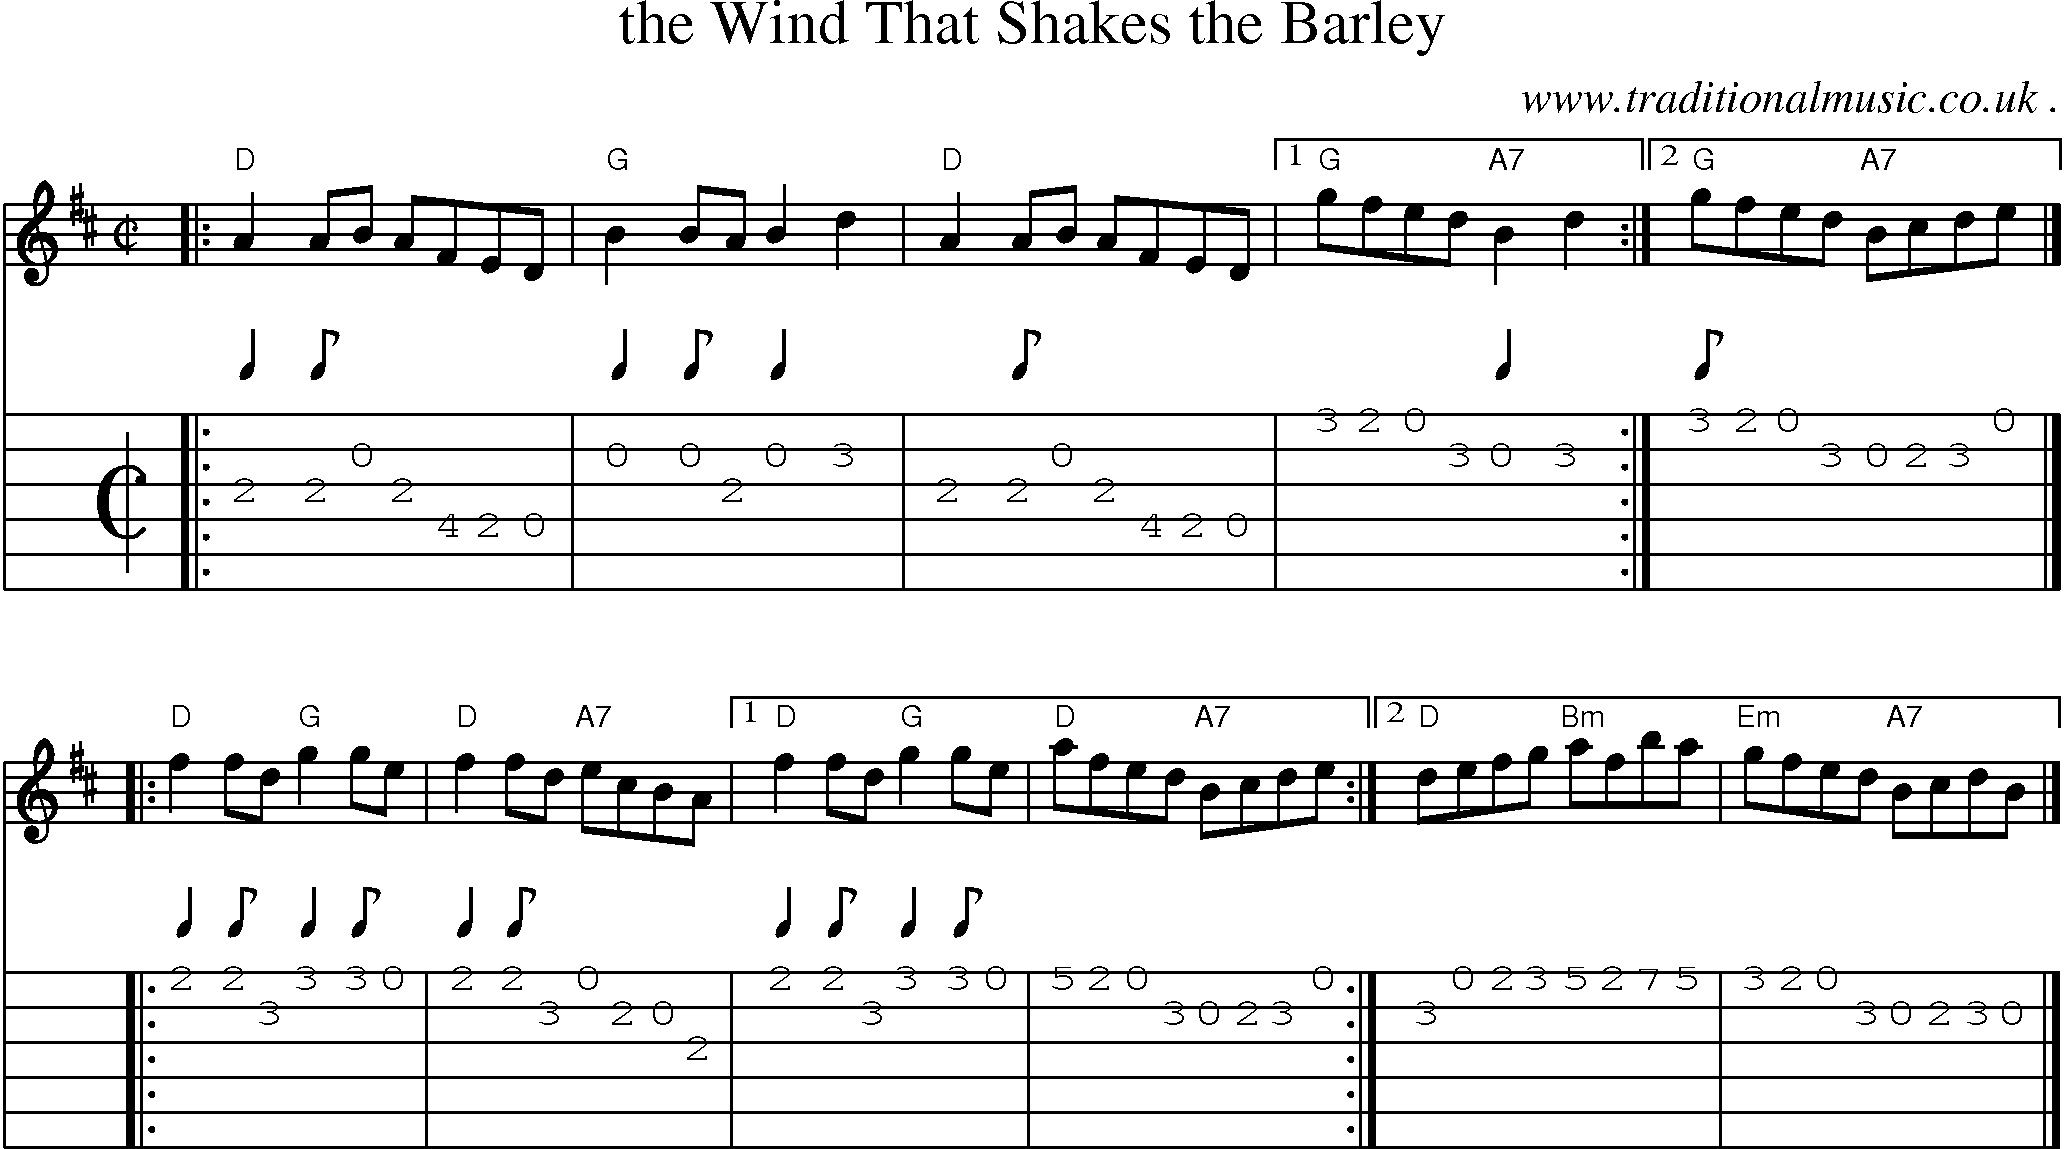 Sheet-music  score, Chords and Guitar Tabs for The Wind That Shakes The Barley